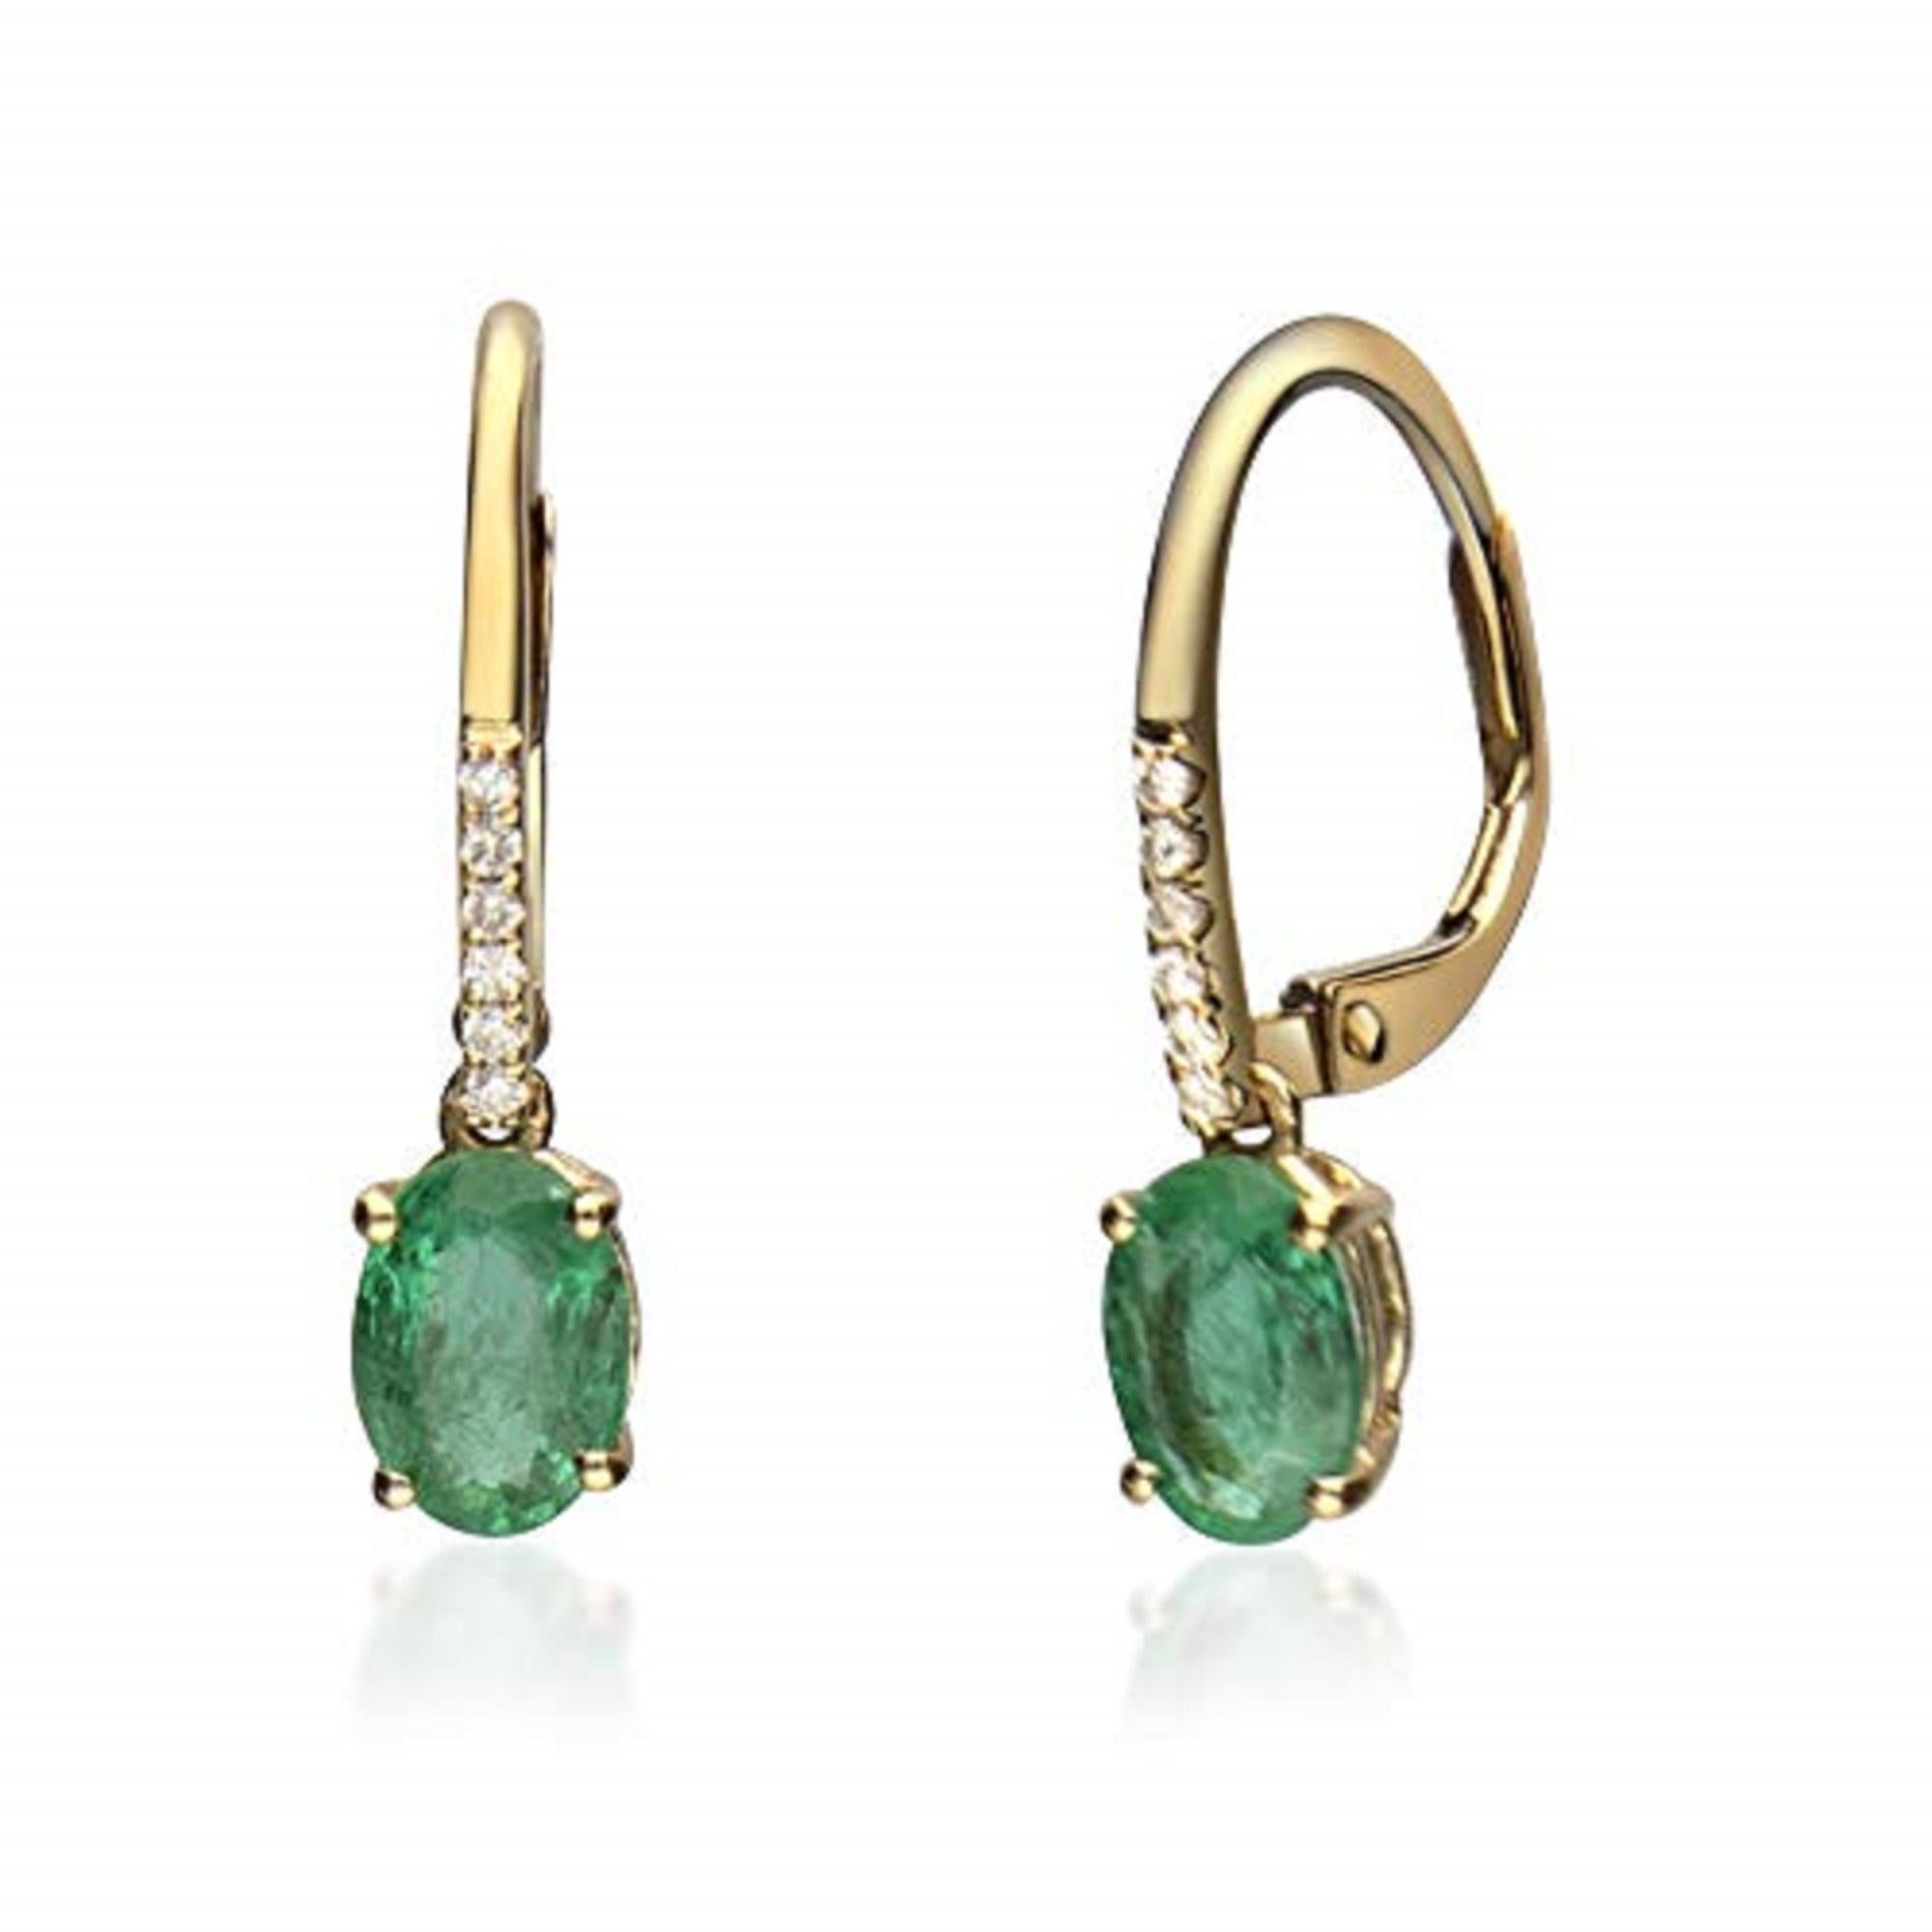 Decorate yourself in elegance with this Earring is crafted from 10K Yellow Gold by Gin & Grace Earring. This Earring is made up of 5X7 Oval-Cut prong setting Natural Emerald (2 pcs) 1.50 Carat and Round-Cut prong setting Diamond (12 pcs) 0.06 Carat.